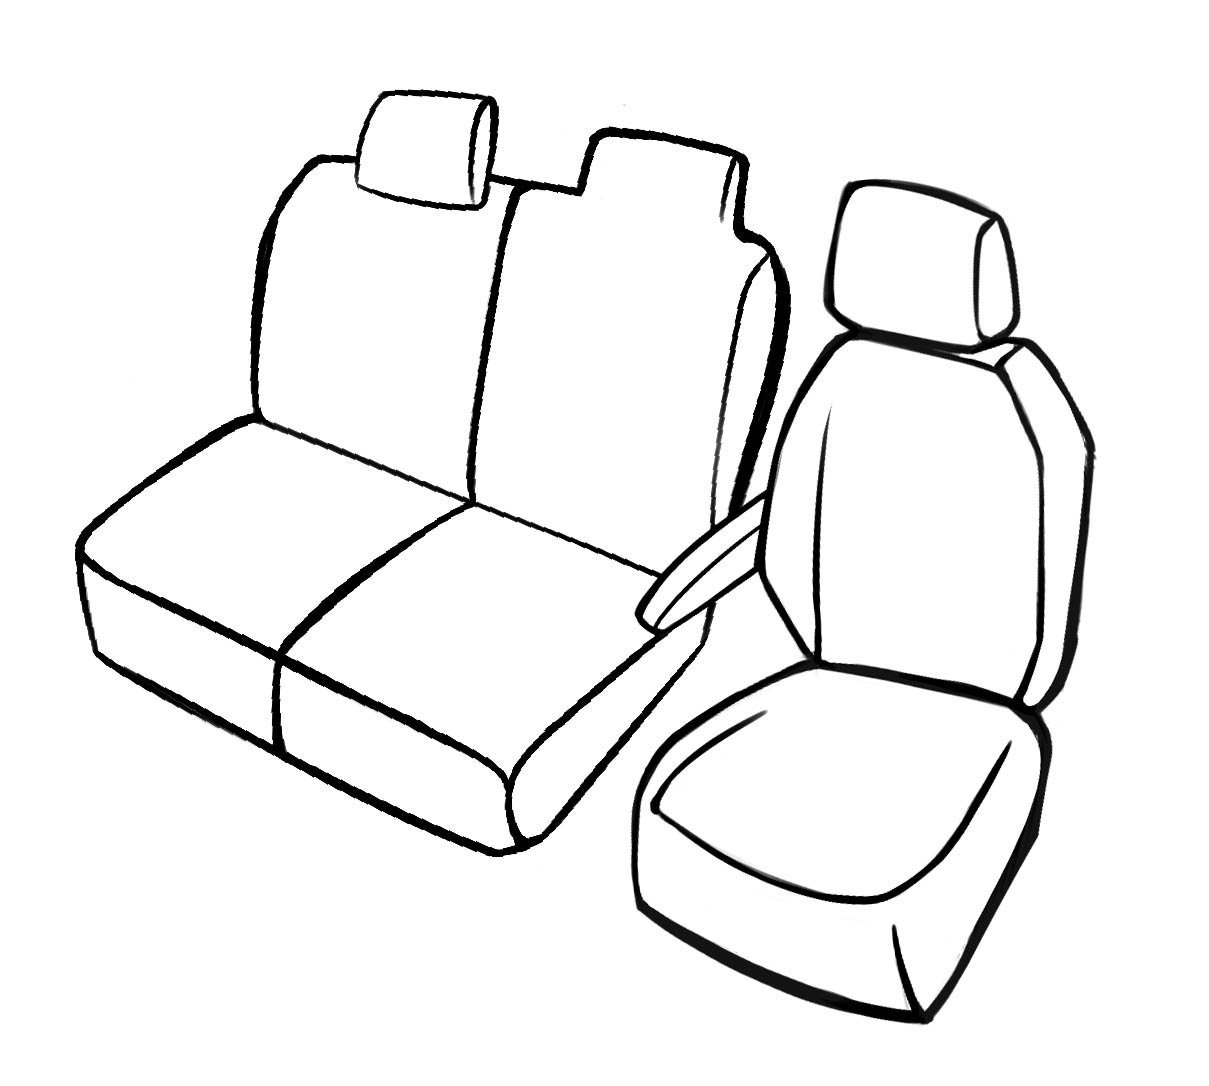 Premium Seat Cover for Fiat Talento 06/2016-Today, 1 single seat cover front + armrest cover, 1 double bench cover backrest and bench